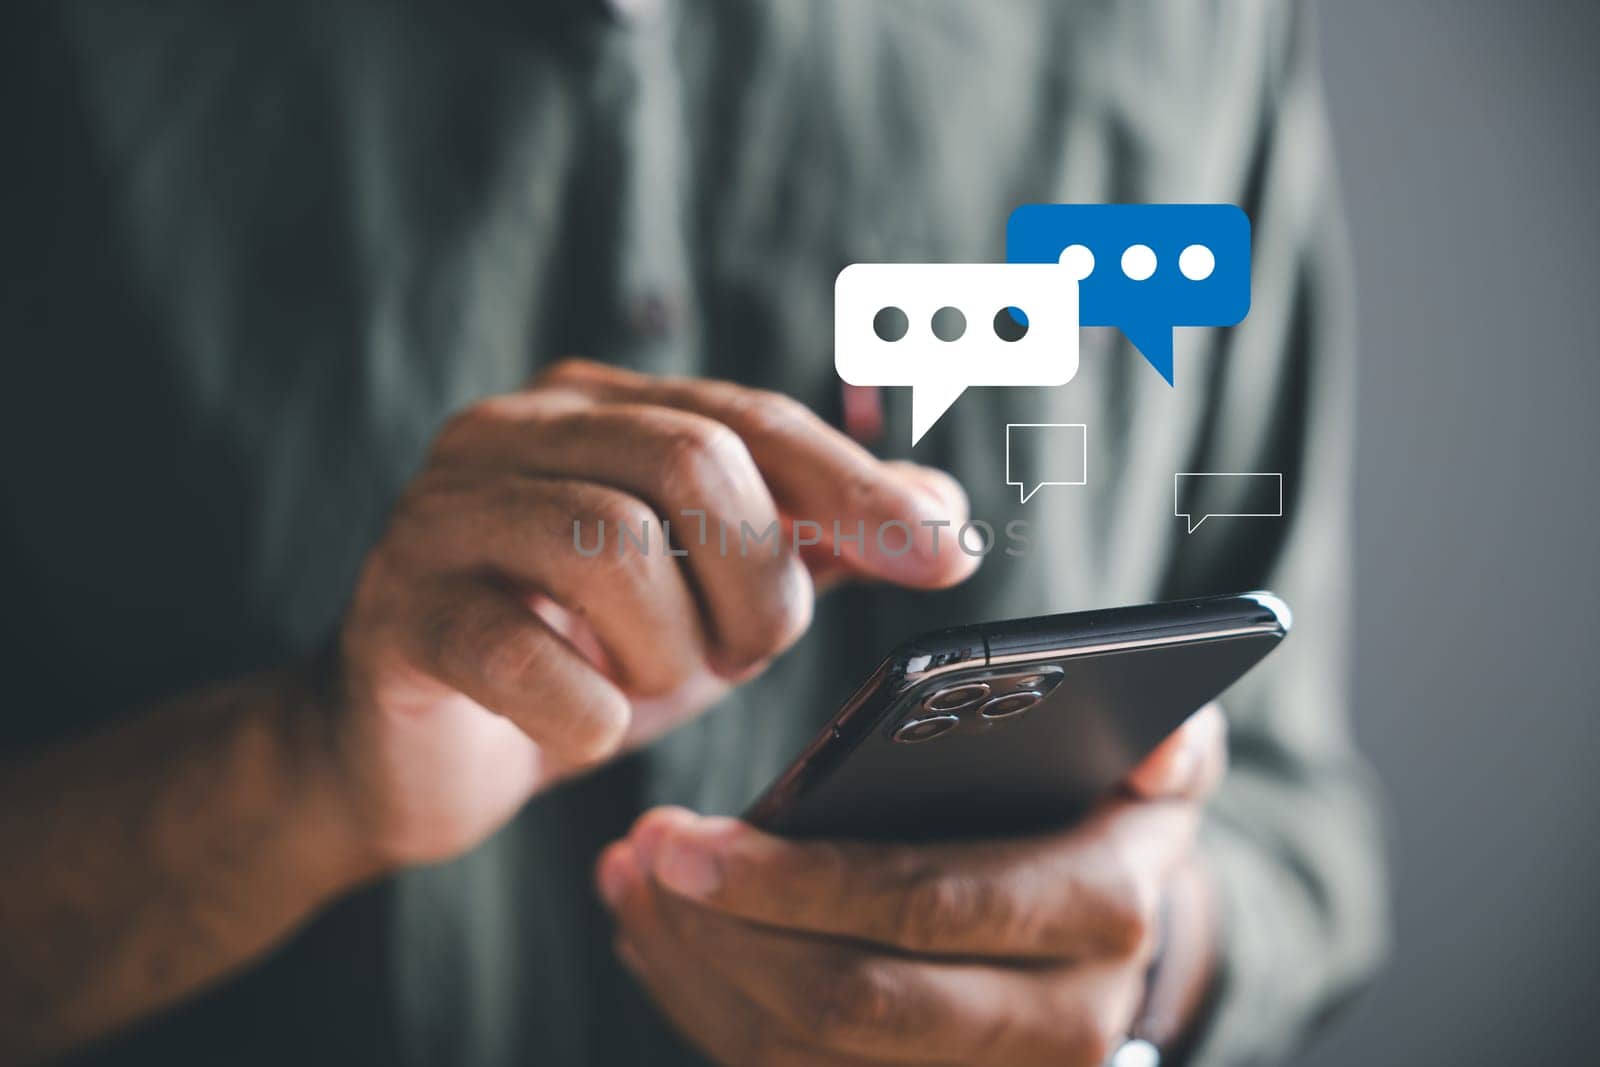 With precision, man hand utilizes his smartphone for live chat engagement, embodying social network and chatting concepts. Chat box icons symbolize technology-driven erof social medimarketing.